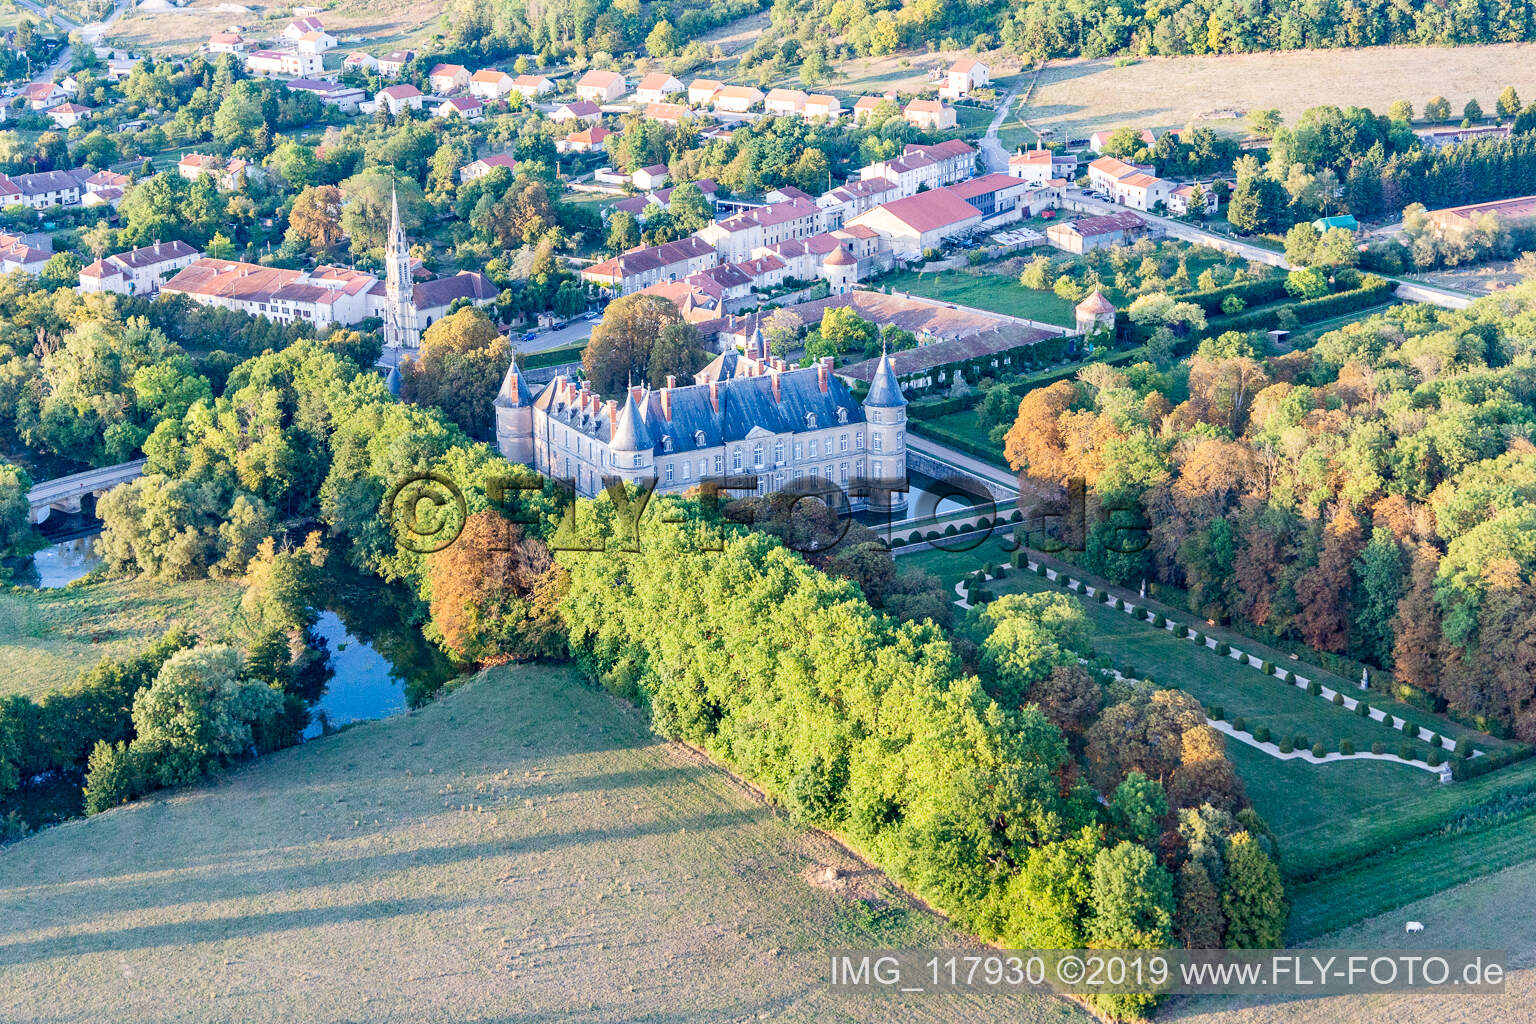 Chateau de Haroué in Haroué in the state Meurthe et Moselle, France from a drone